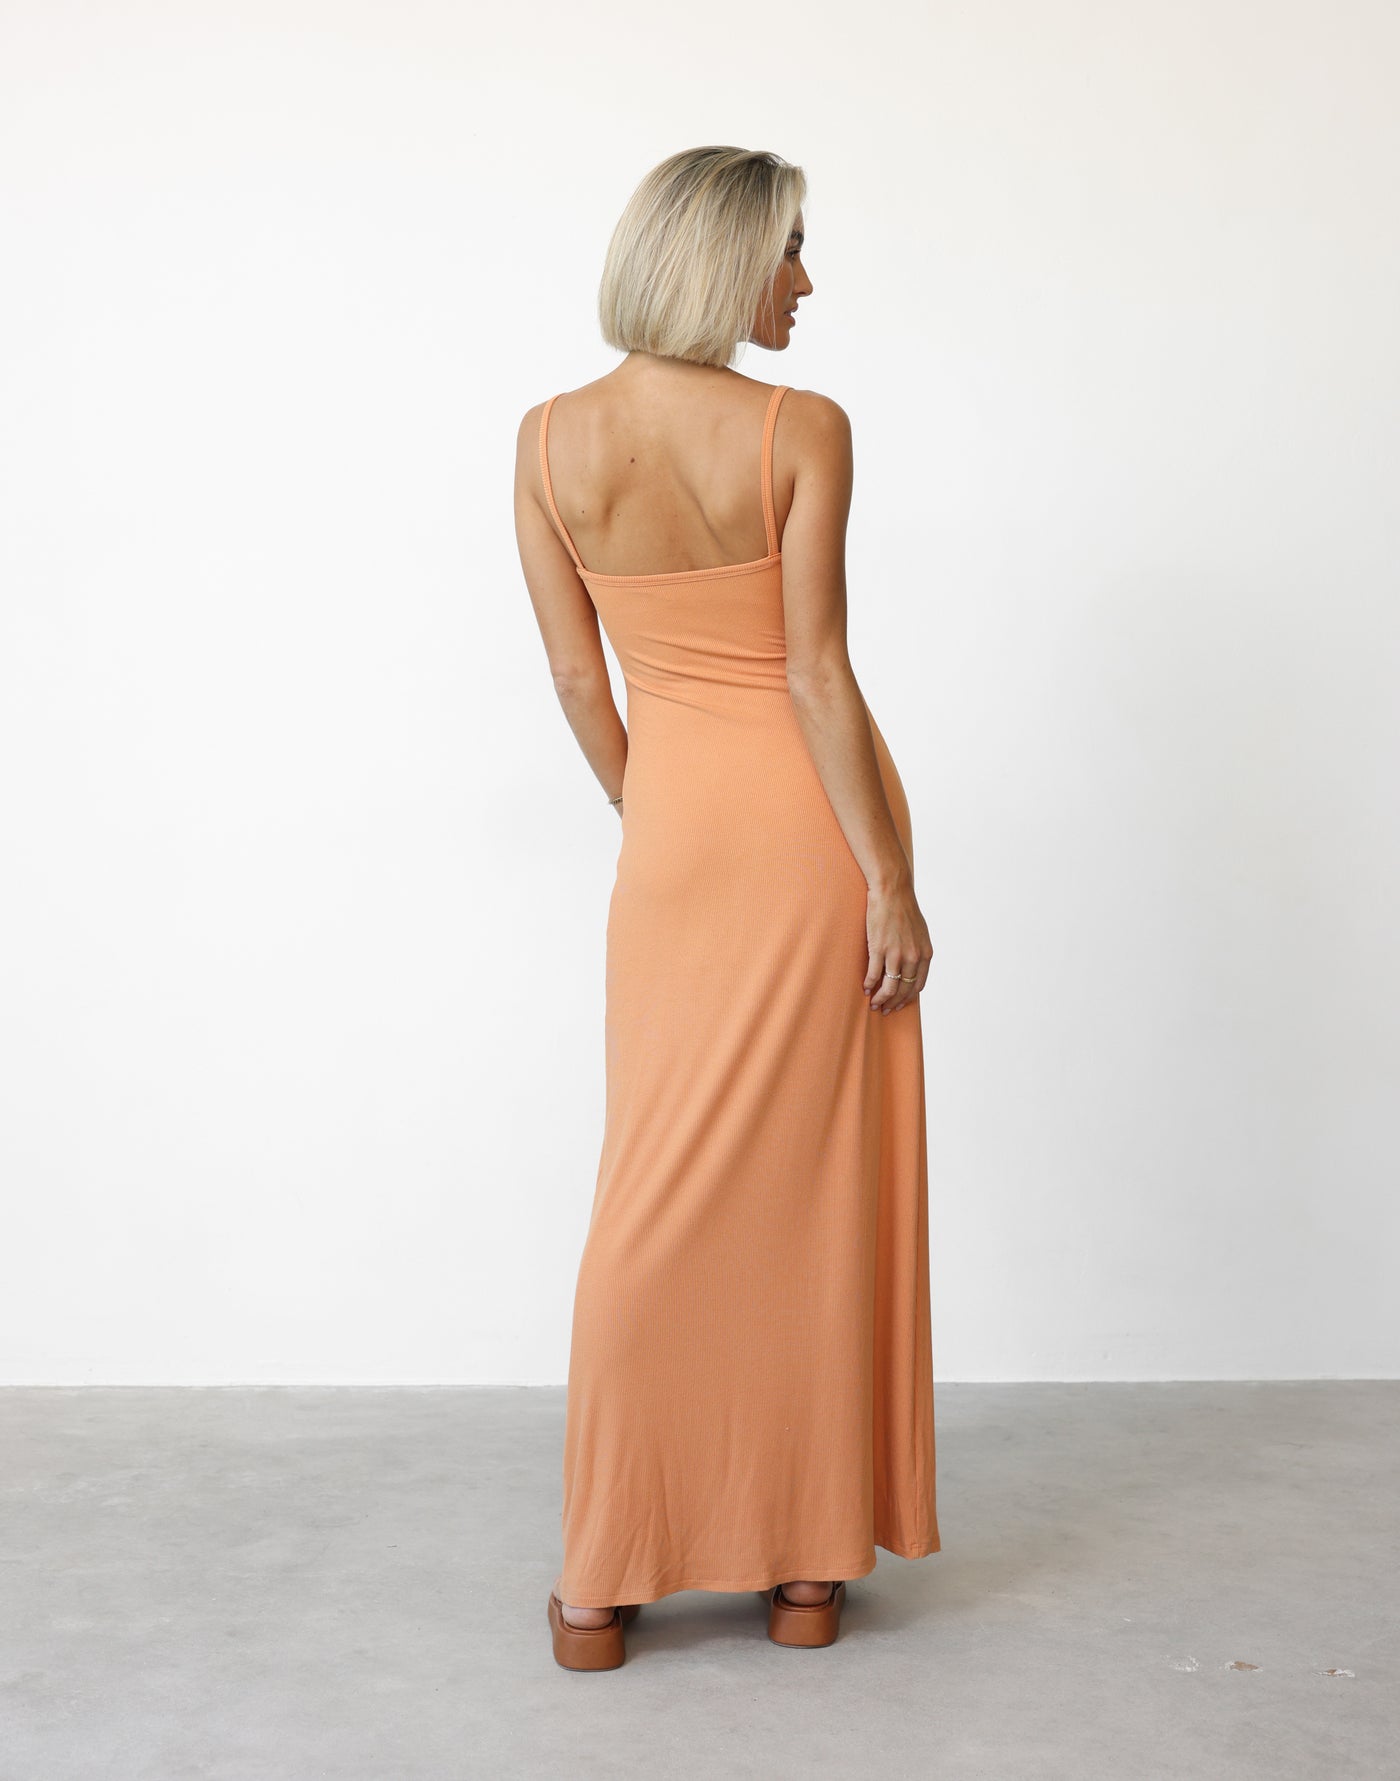 Helia Maxi Dress (Apricot) | CHARCOAL Exclusive - Ribbed Bodycon Flared Hem Maxi Dress - Women's Dress - Charcoal Clothing